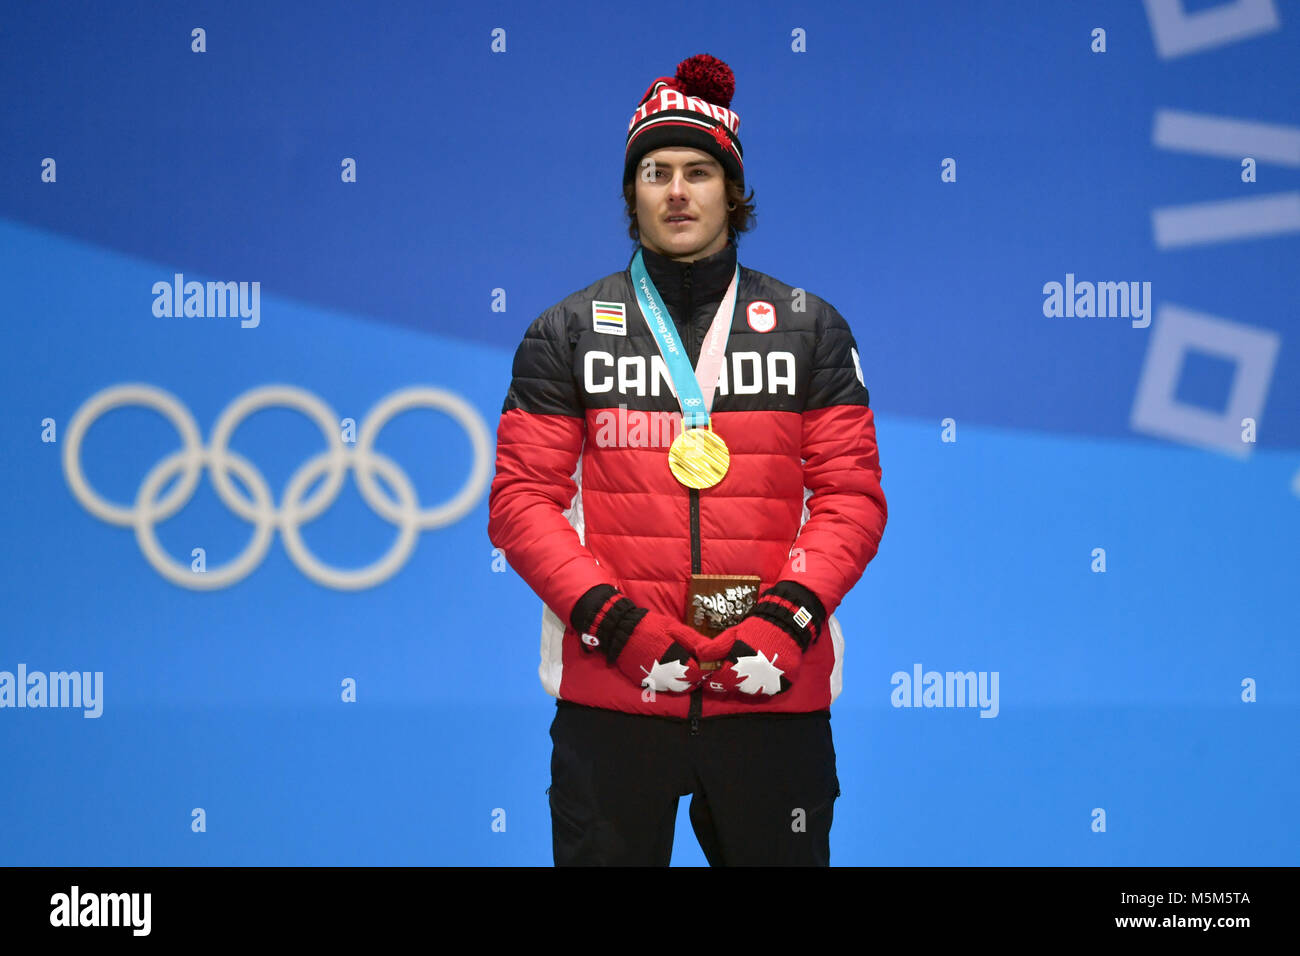 Page 14 - Olympiade High Resolution Stock Photography and Images - Alamy